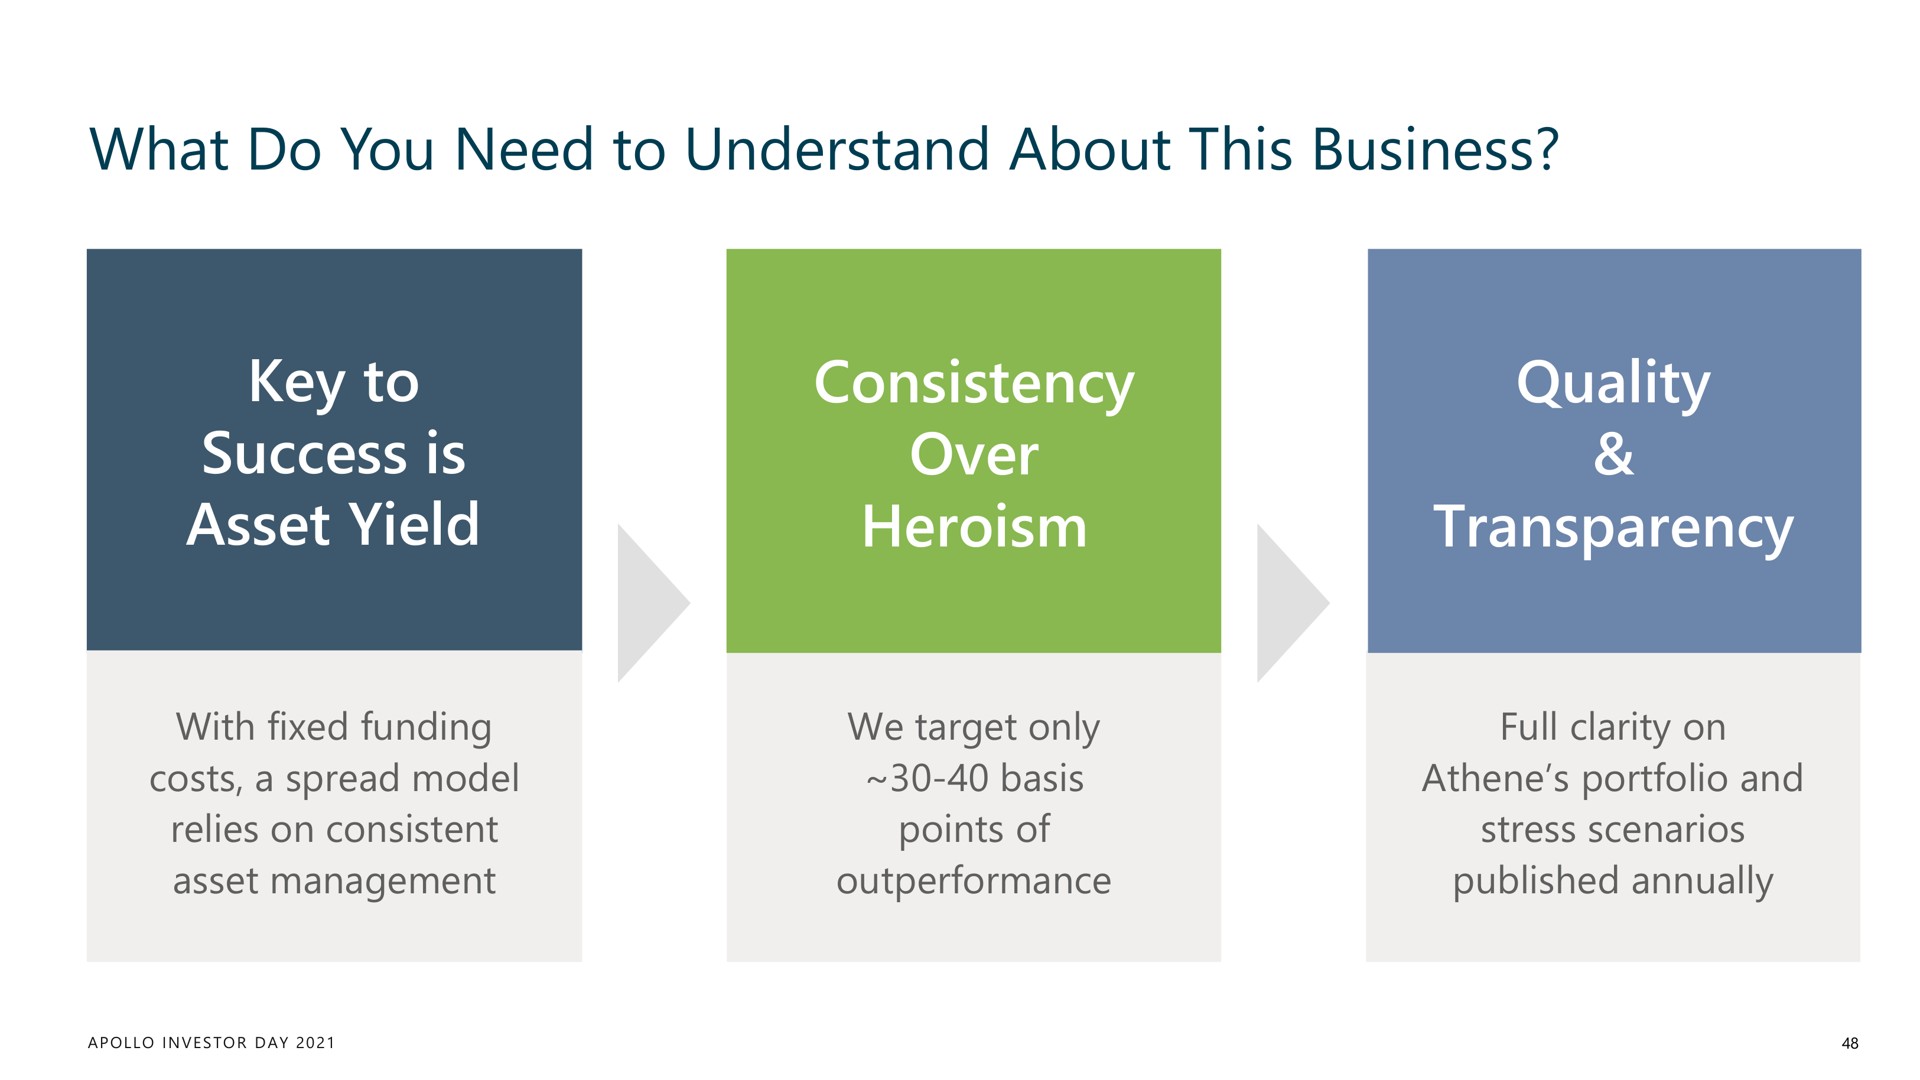 what do you need to understand about this business key to success is asset yield consistency over heroism quality transparency | Apollo Global Management